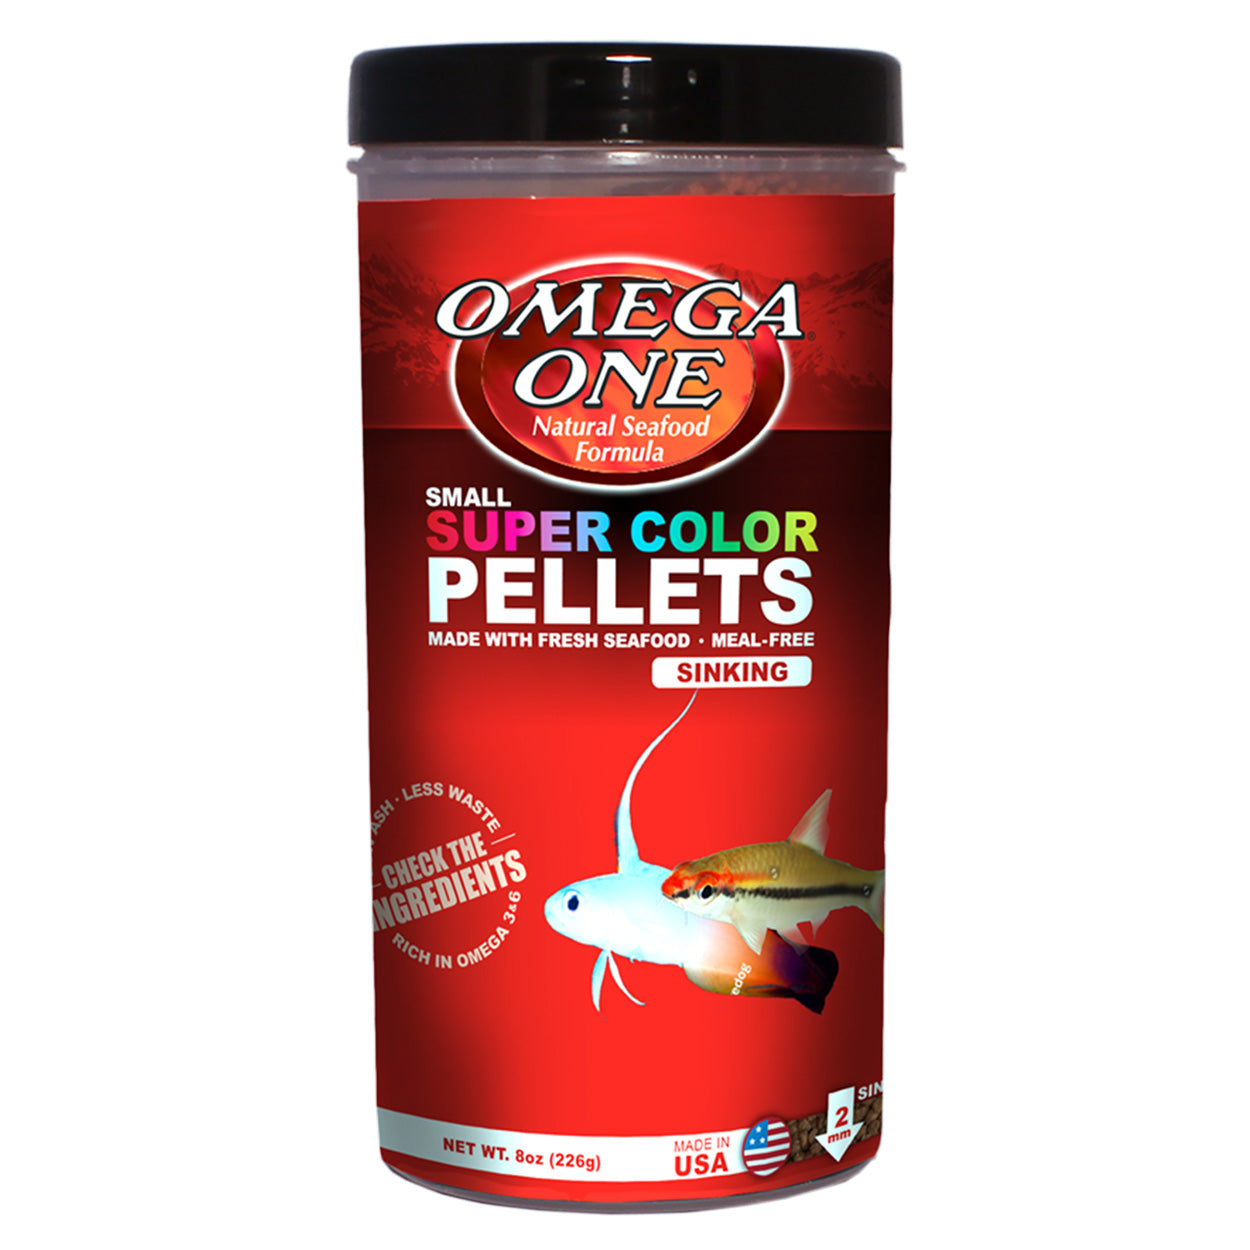 Omega One Super Color Pellets - Small Sinking